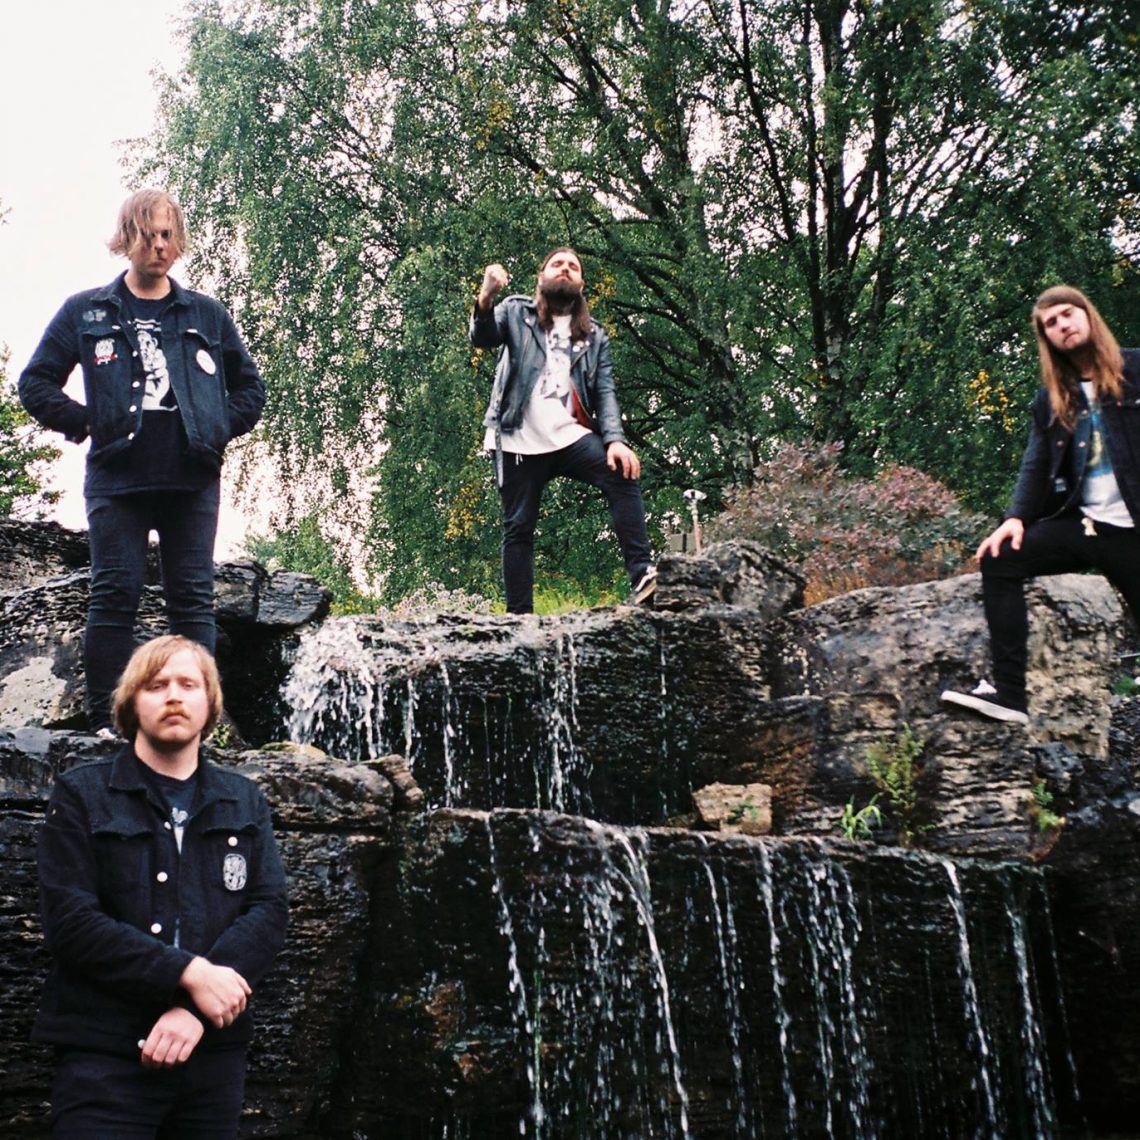 Oslo-punks Wet Dreams release brand new single Boogie ahead of their debut album